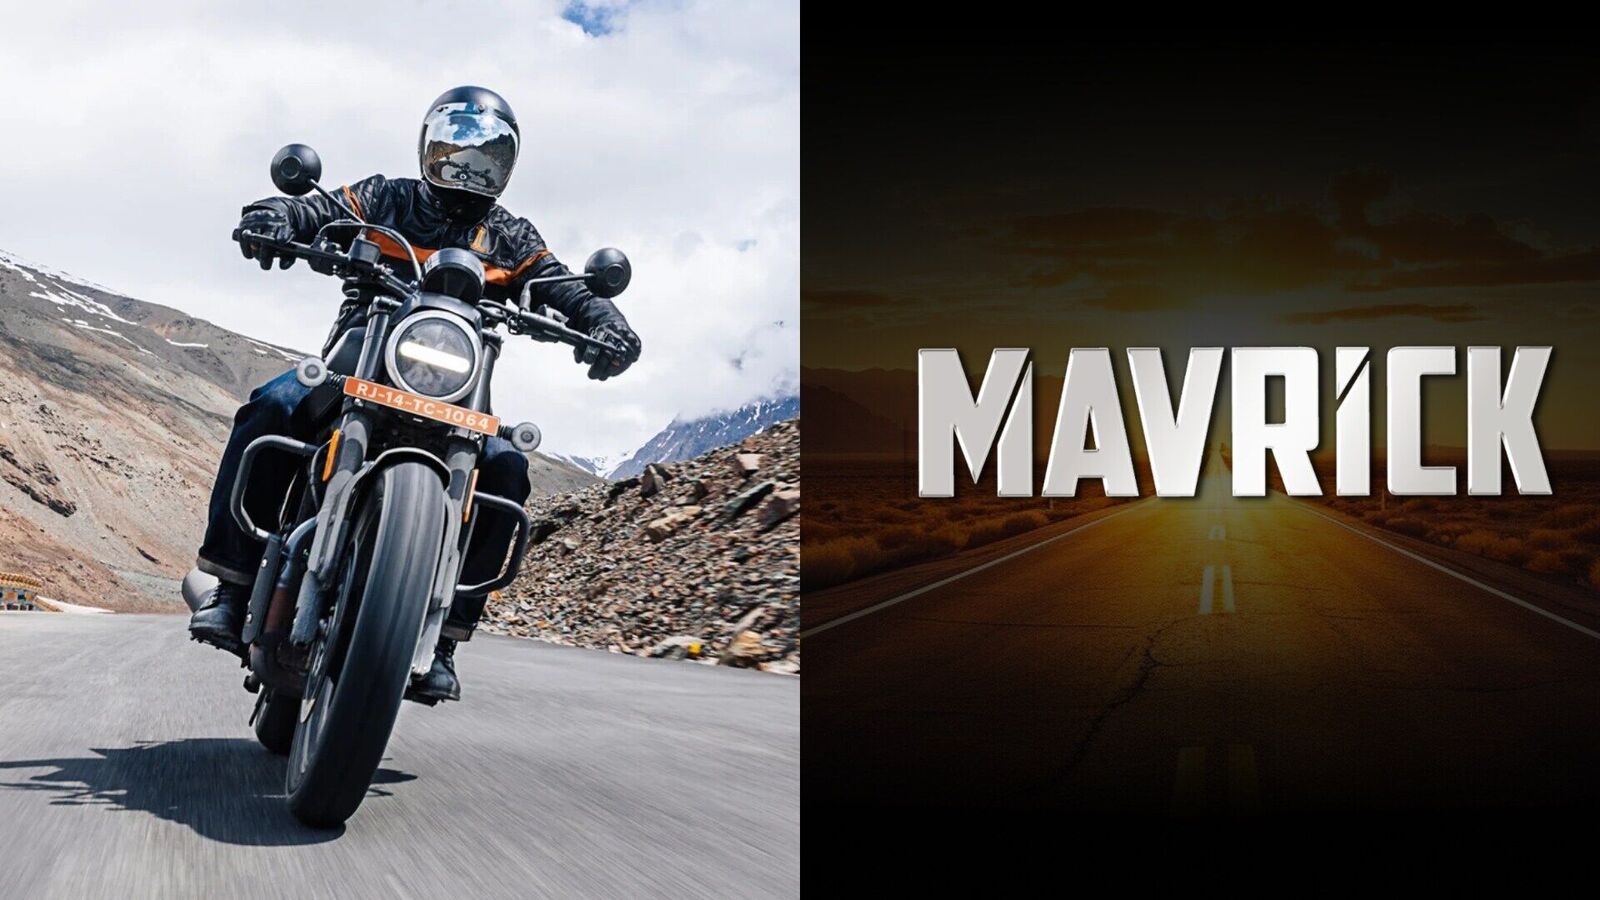 Hero Mavrick name confirmed for flagship 440 cc motorcycle, based on Harley X440